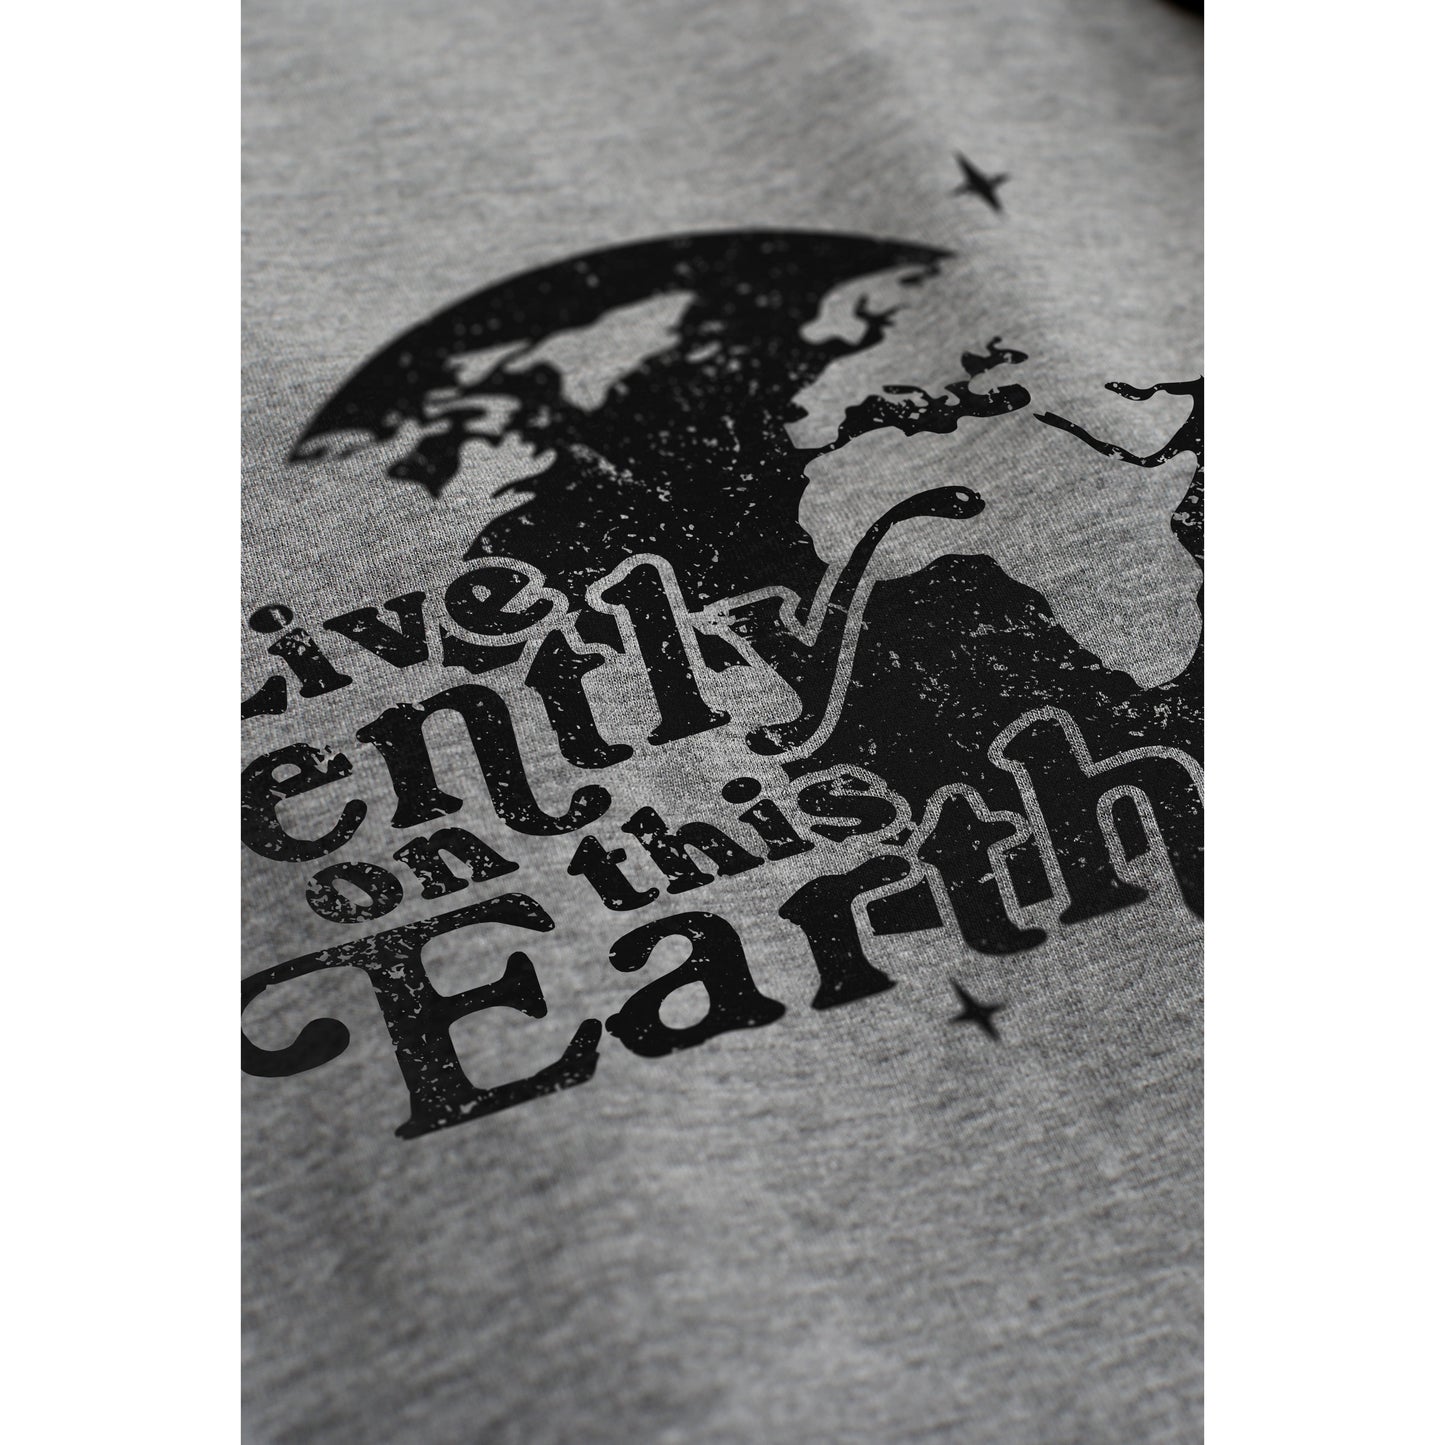 Live Gently On This Earth - Stories You Can Wear by Thread Tank